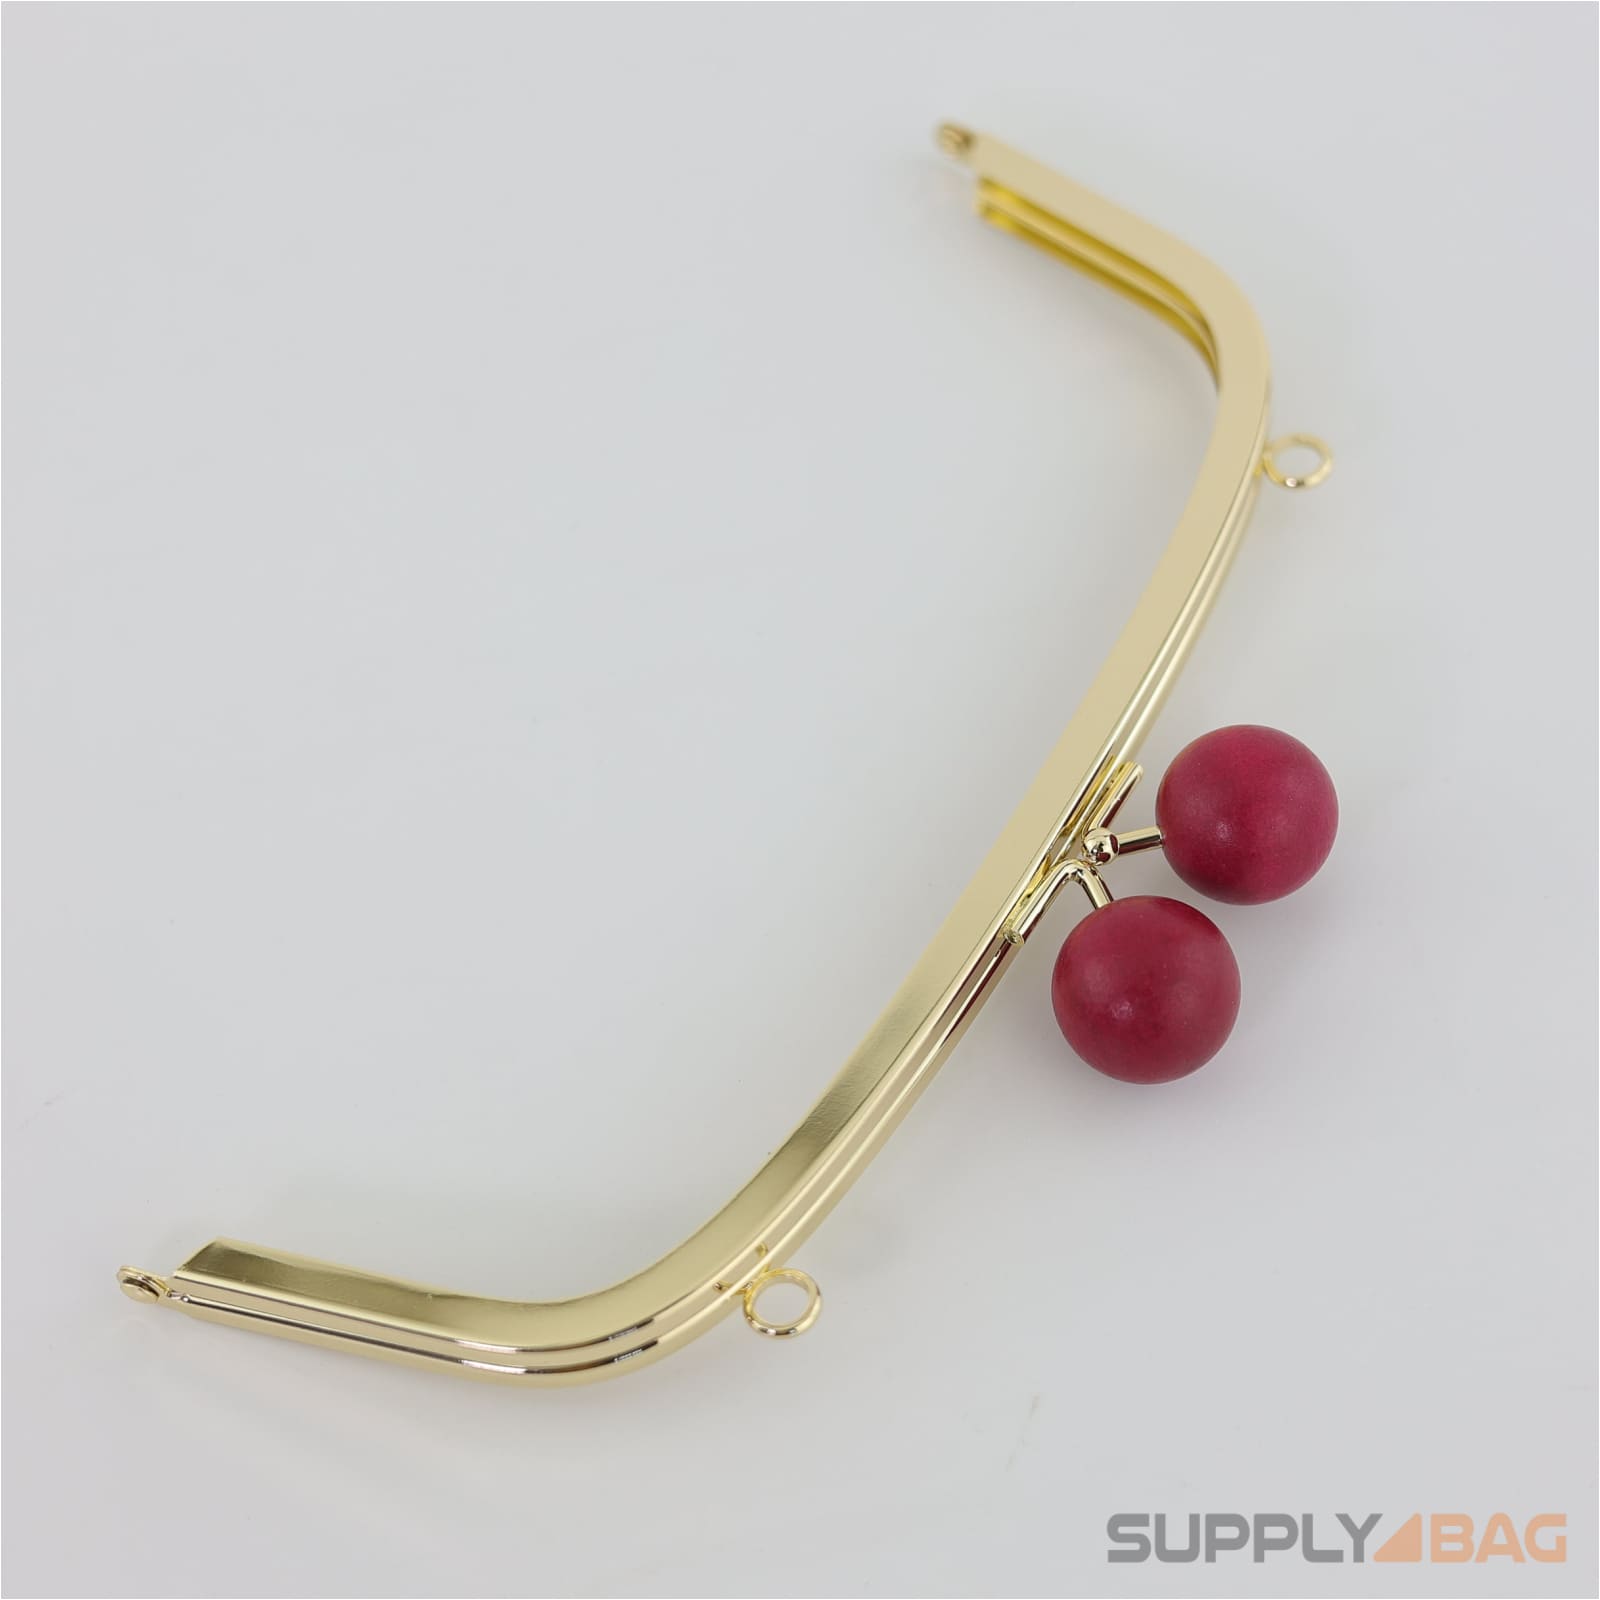 8.5 x 3 inch - kisslock clasp (red) gold metal purse frame with o